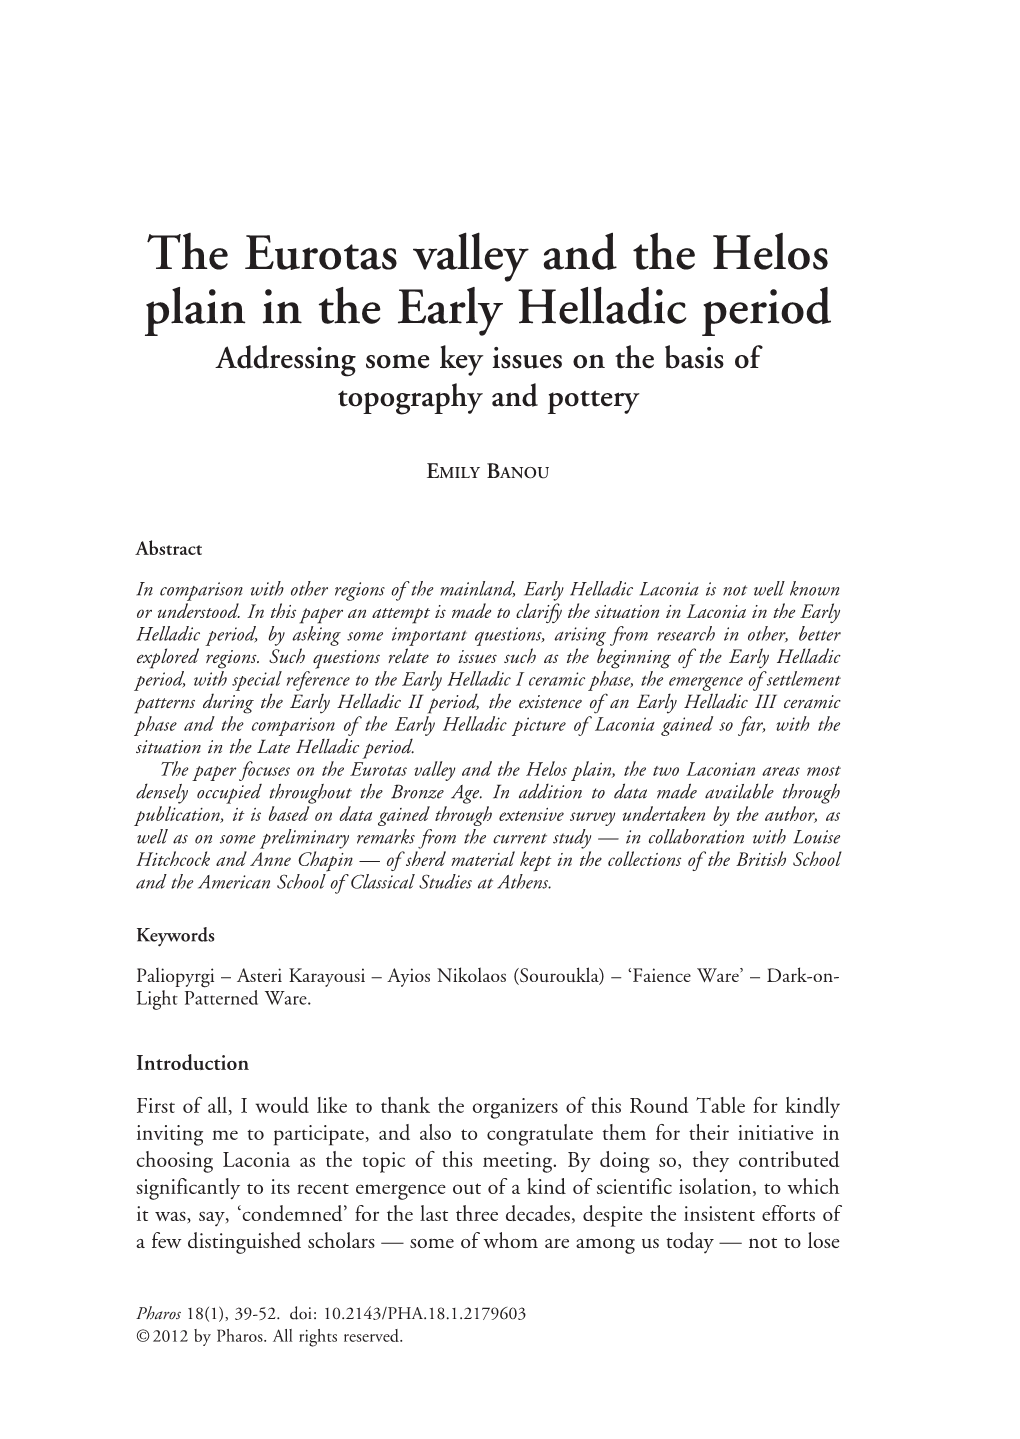 The Eurotas Valley and the Helos Plain in the Early Helladic Period Addressing Some Key Issues on the Basis of Topography and Pottery